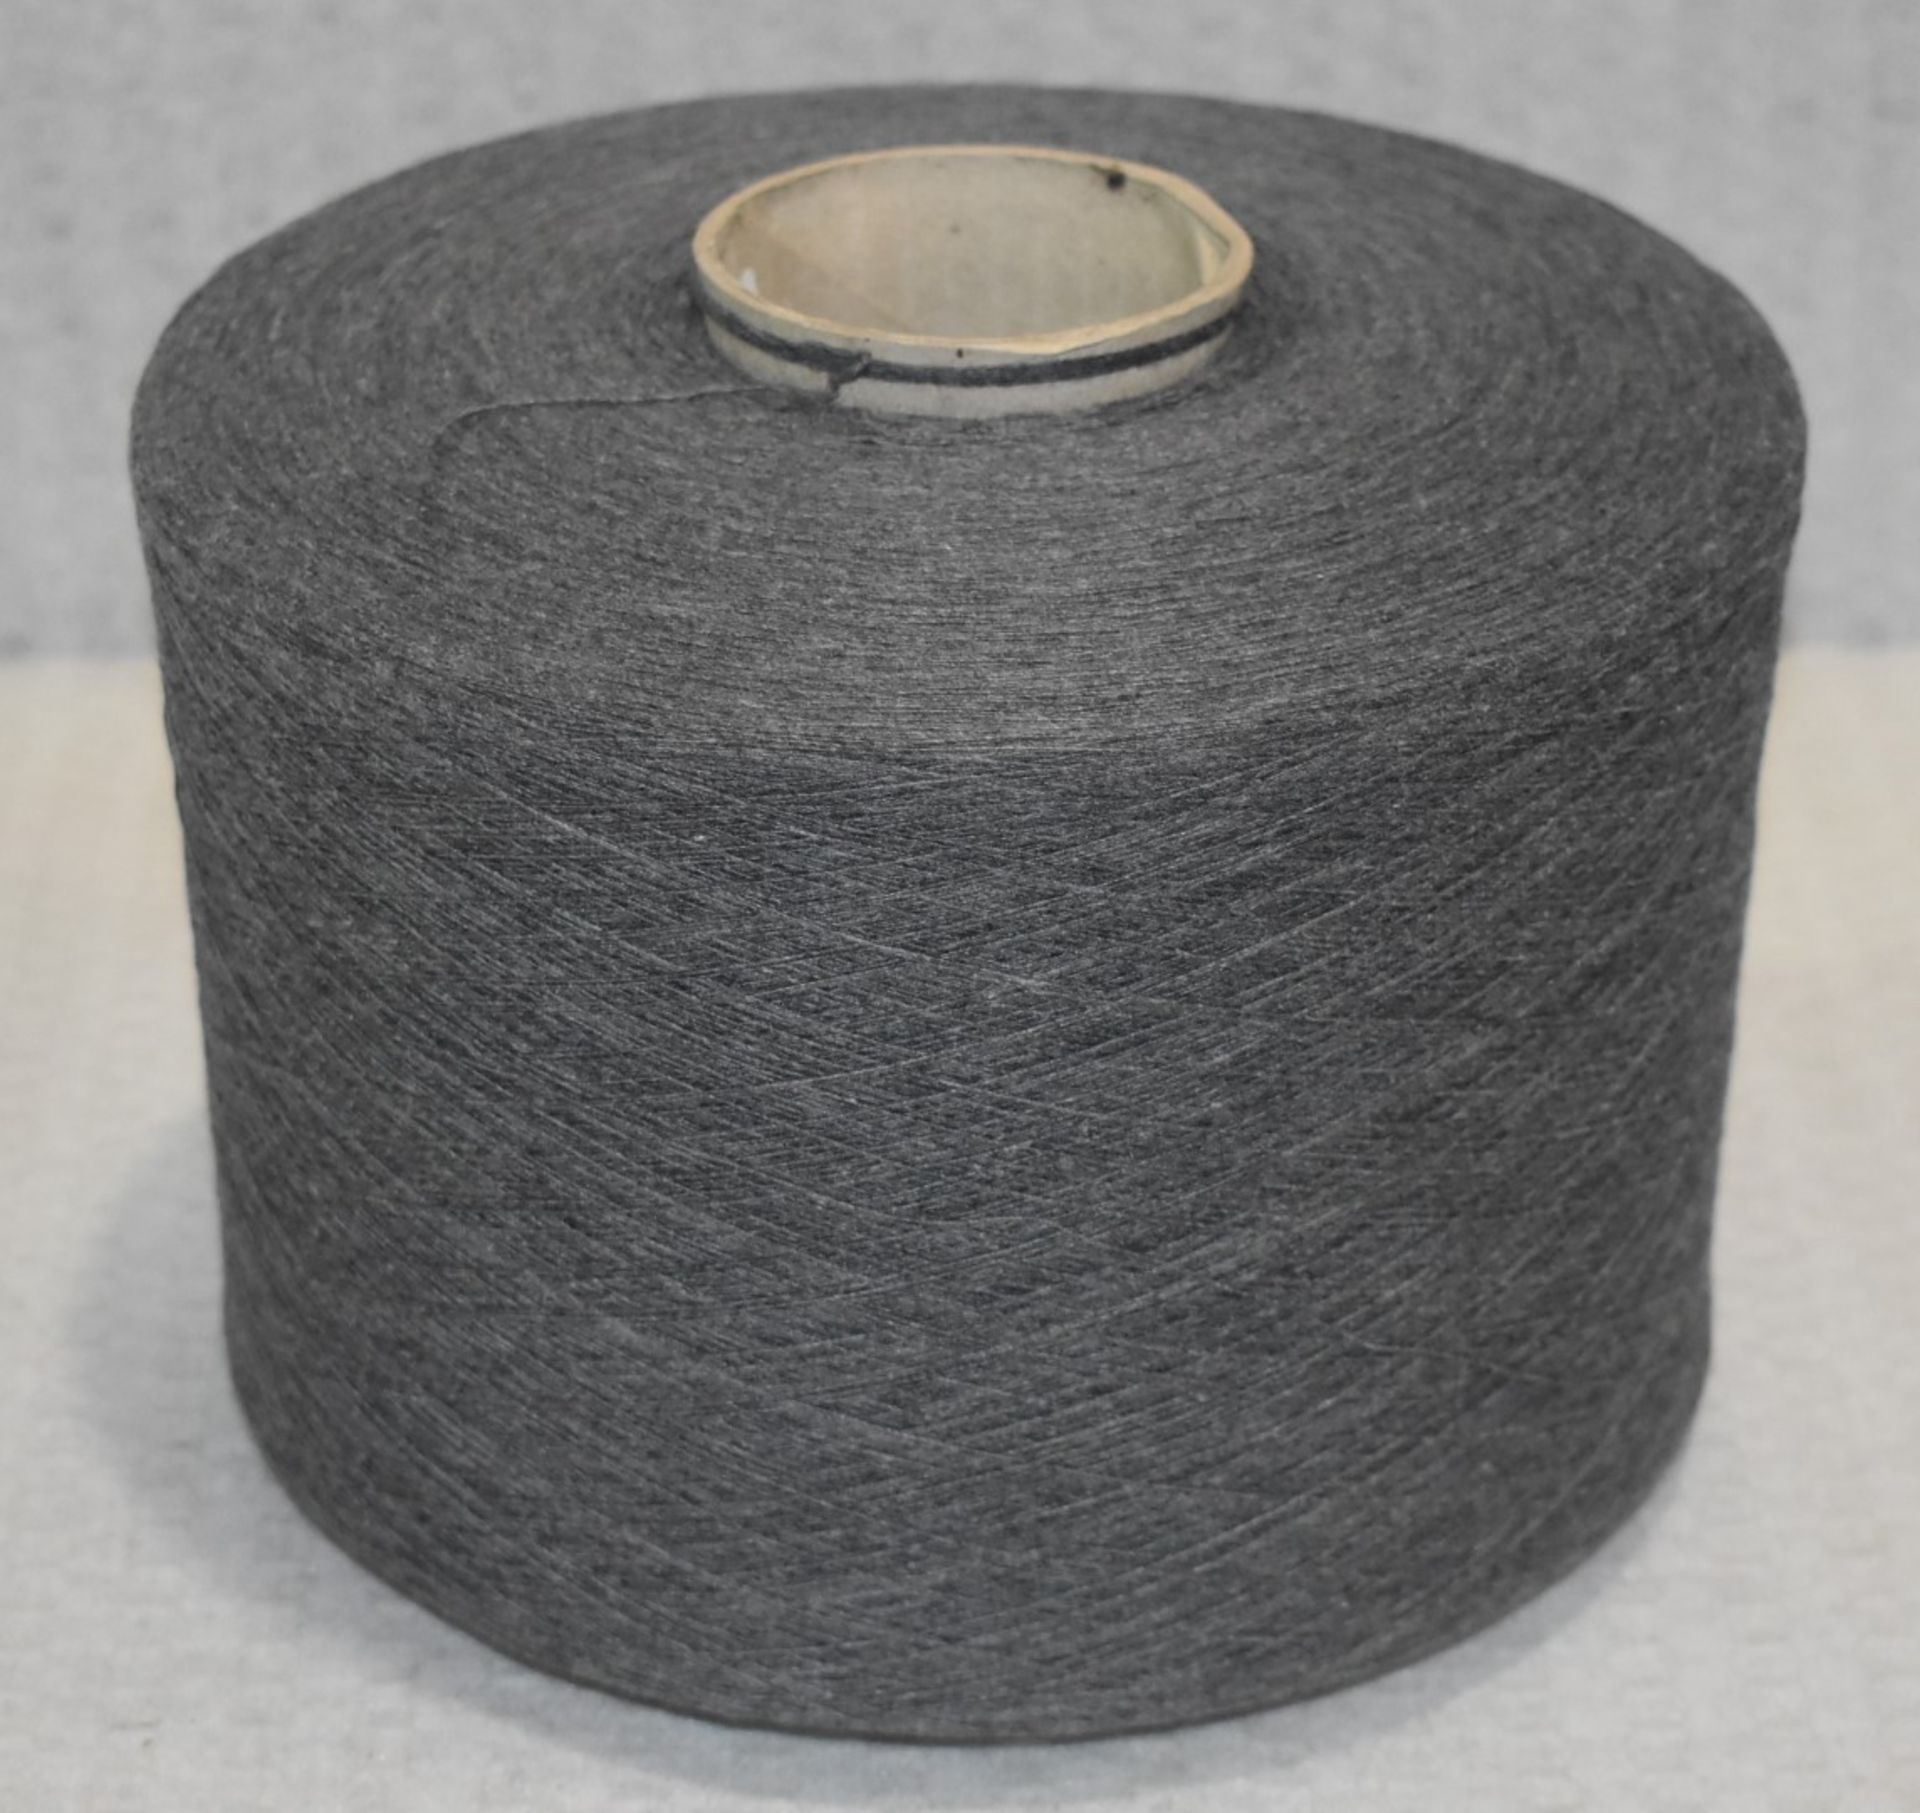 36 x Cones of 1/13 MicroCotton Knitting Yarn - Mid Grey - Approx Weight: 2,500g - New Stock ABL Yarn - Image 7 of 10